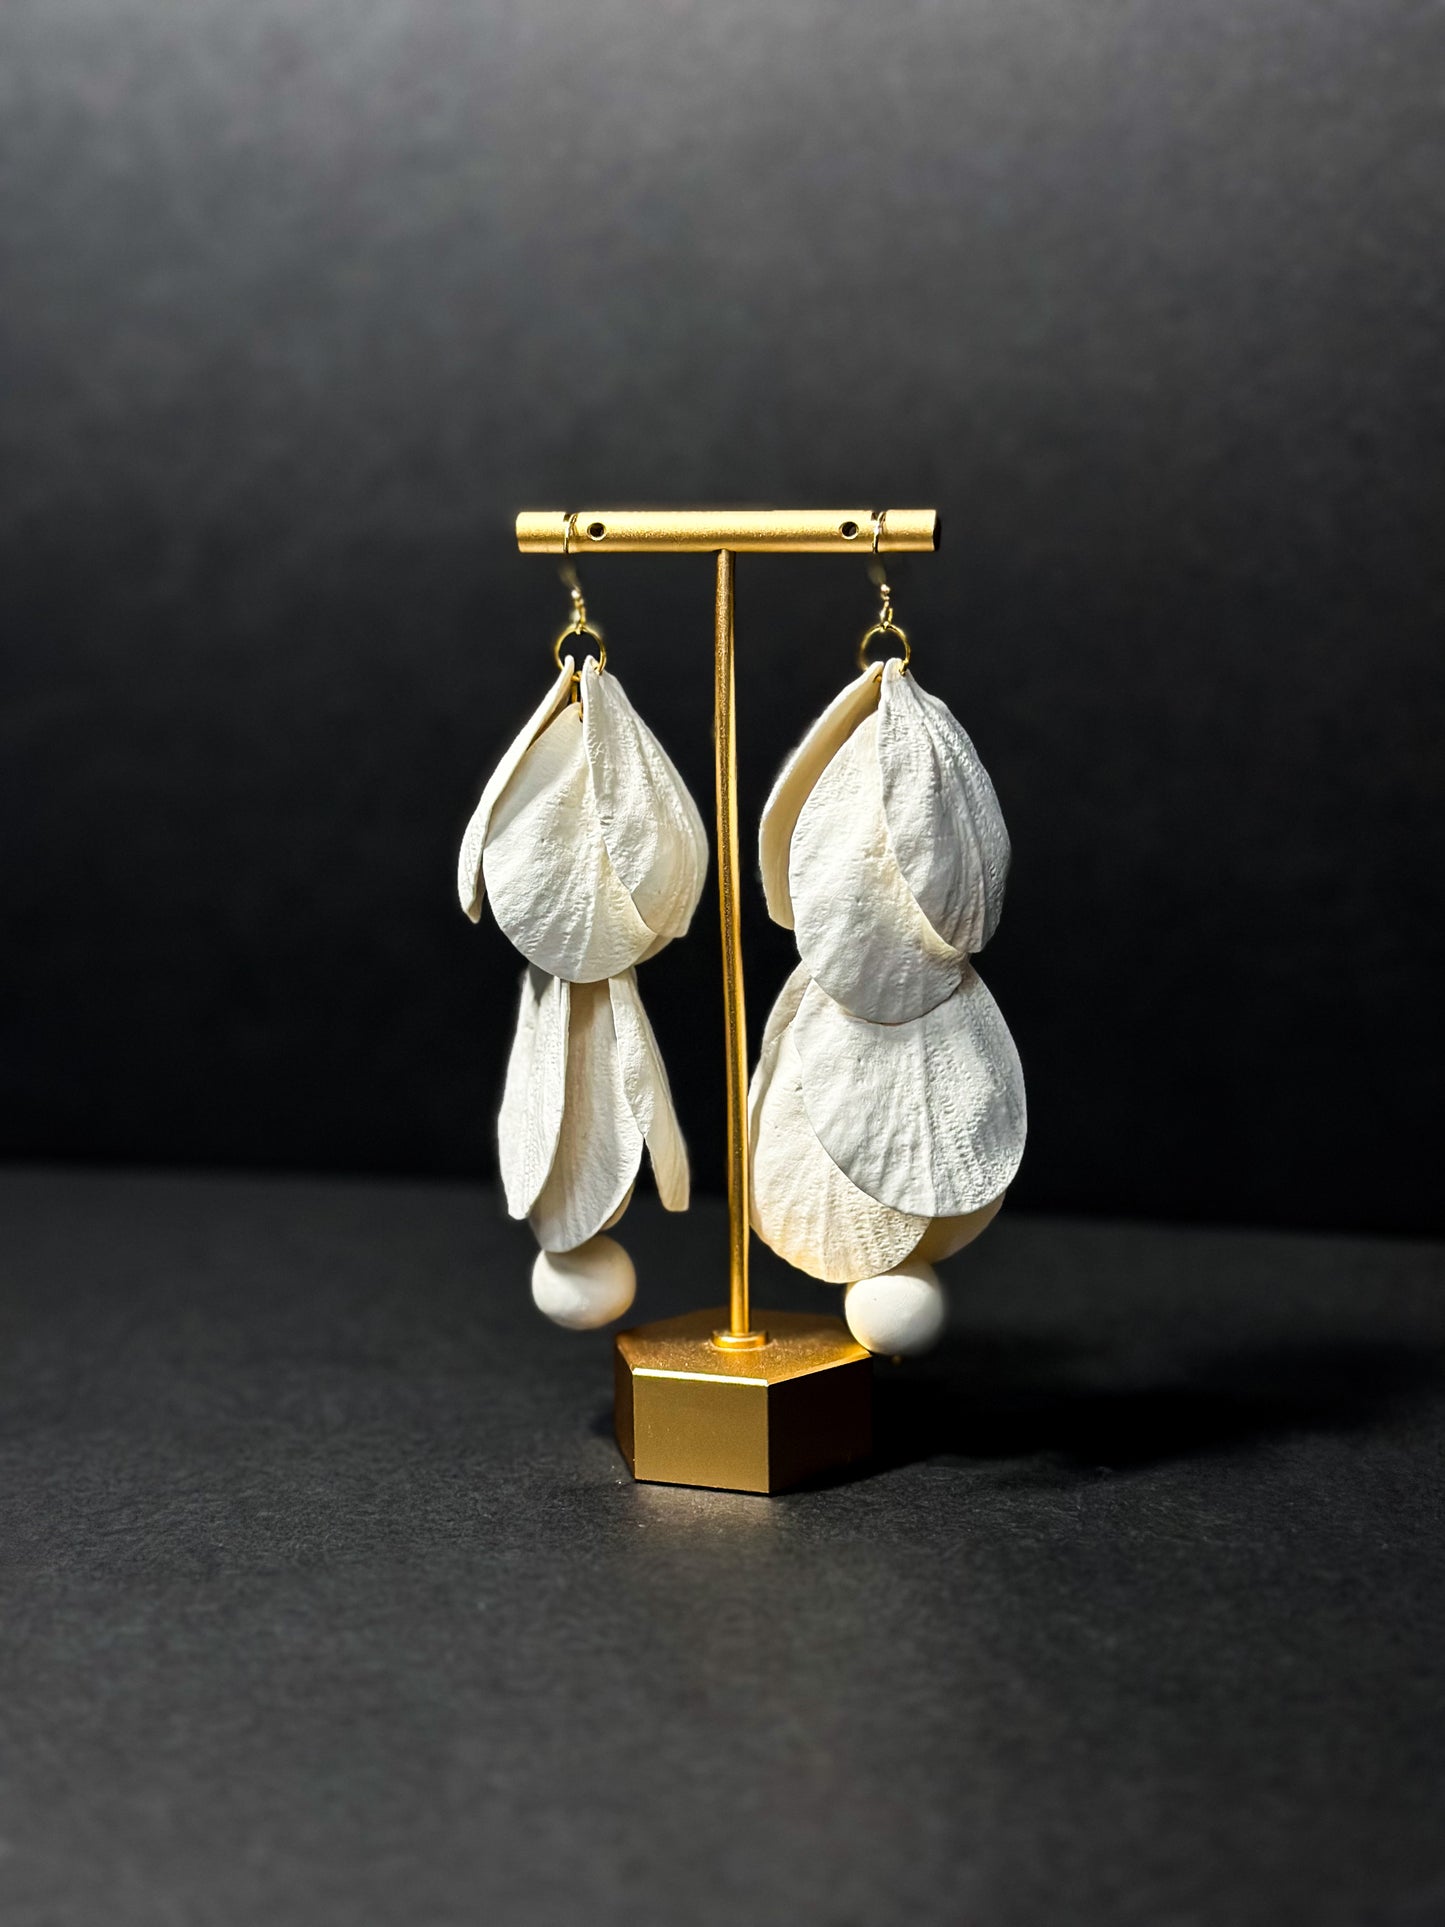 White handmade earrings hanging on an earring display. Meticulously hand sculpted petals are combined to achieve a cascading floral design.